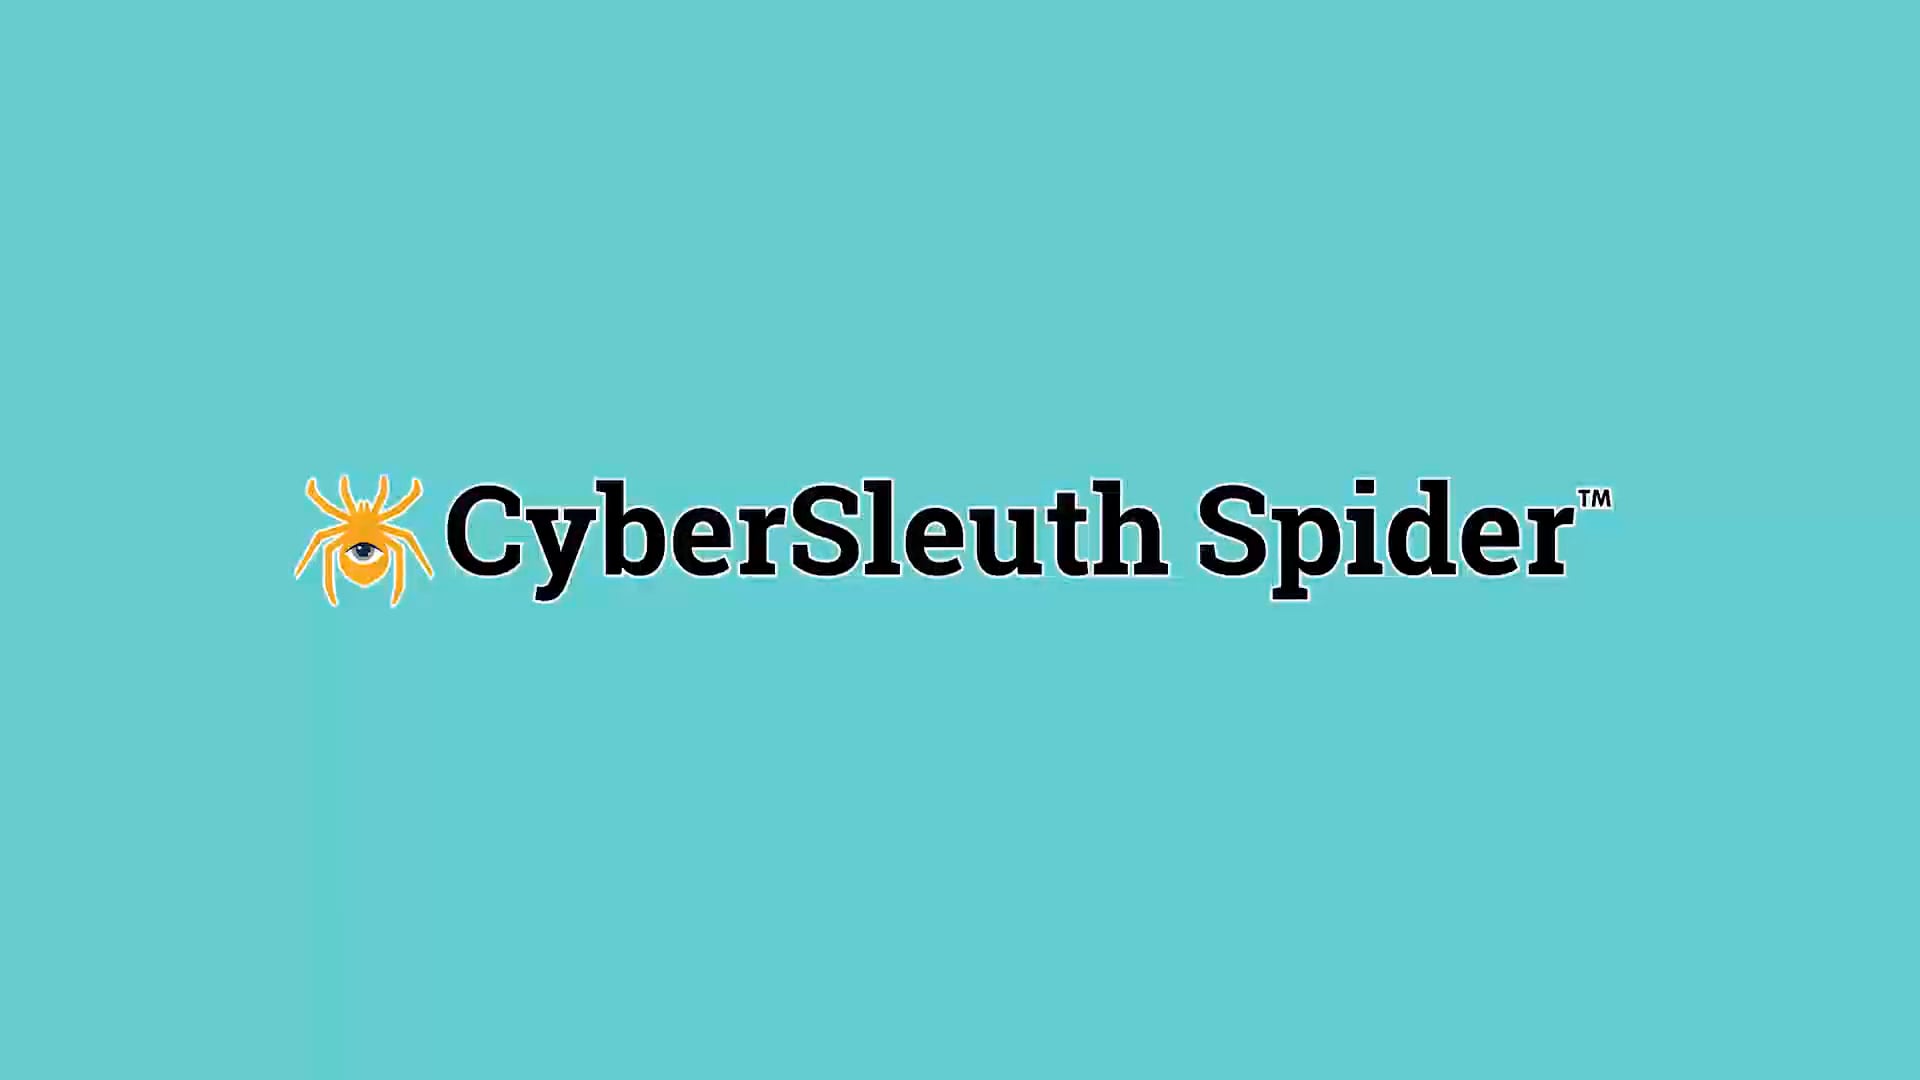 TCR’s CyberSleuth Spider Services for NIST SP 800-171 Compliance